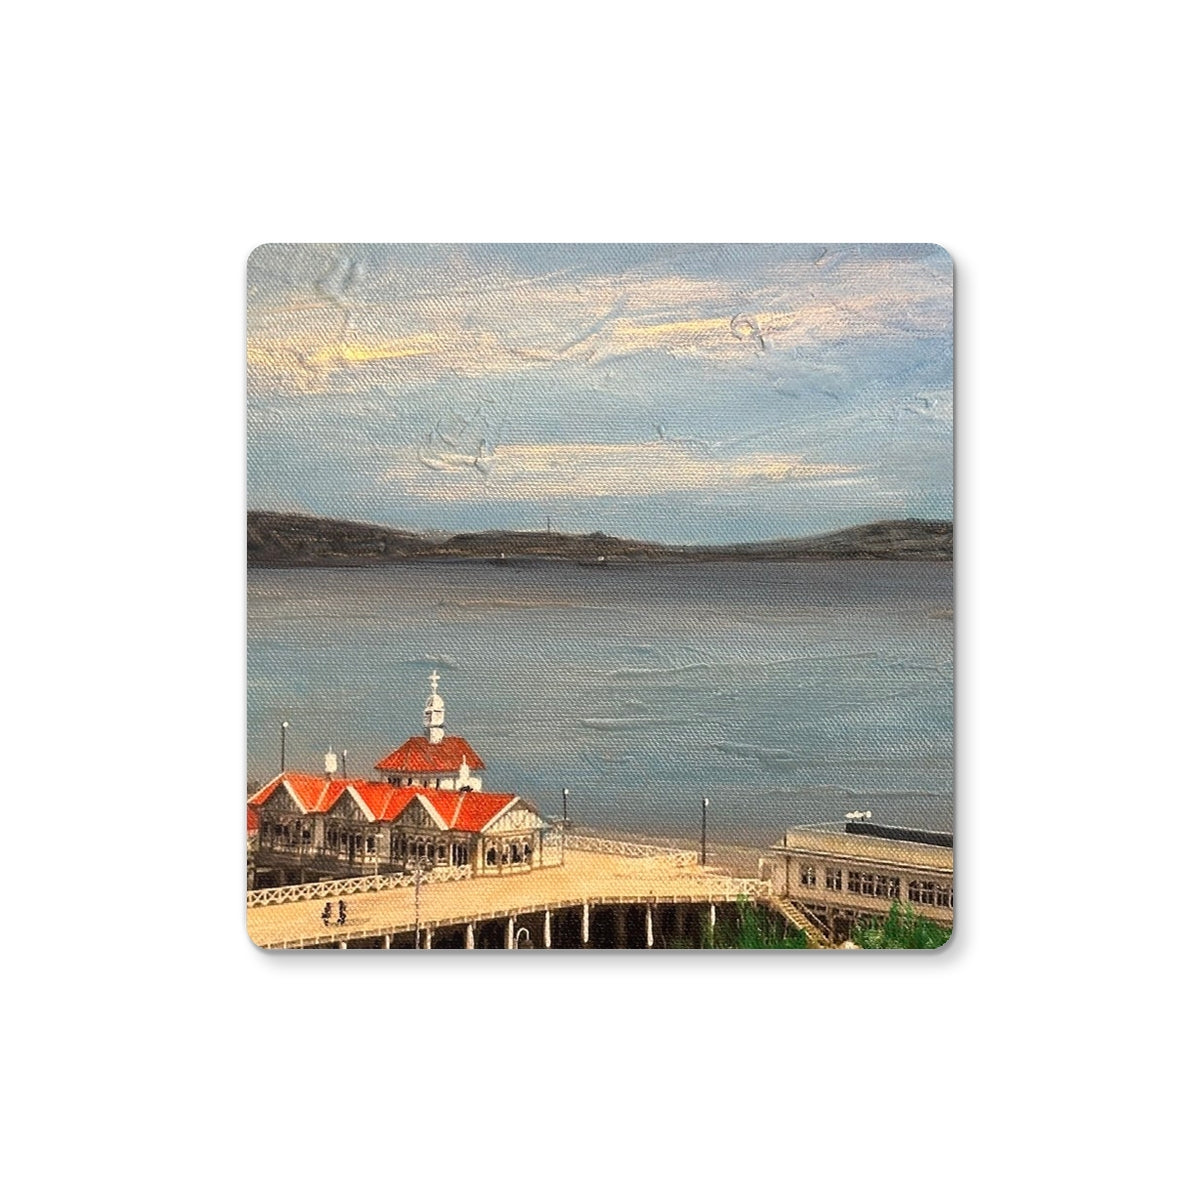 Looking From Dunoon Art Gifts Coaster-Coasters-River Clyde Art Gallery-2 Coasters-Paintings, Prints, Homeware, Art Gifts From Scotland By Scottish Artist Kevin Hunter